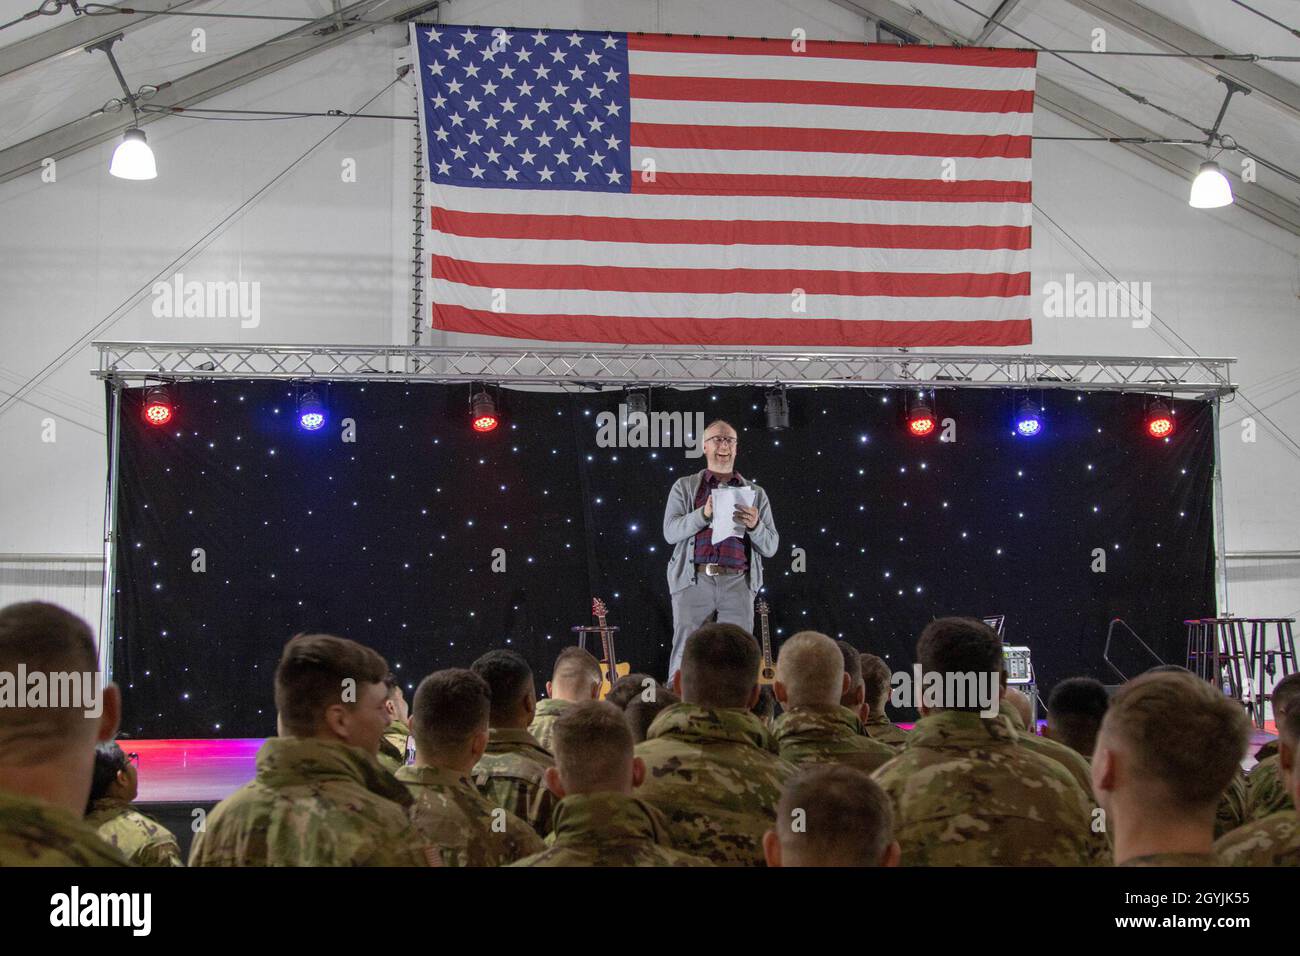 Matt Walsh, actor and comedian, performs standup comedy during the Chairman's annual USO tour show at Mihail Kogalniceanu Air Base, Romania, Jan. 7, 2020. The tour consisted of a show put on by celebrities and entertainers for Soldiers stationed on MKAB. USO performers volunteered to travel over the New Year to show service members that America remembers them and values their service. (U.S. Army photo by Spc. Ethan Valetski, 5th Mobile Public Affairs Detachment) Stock Photo